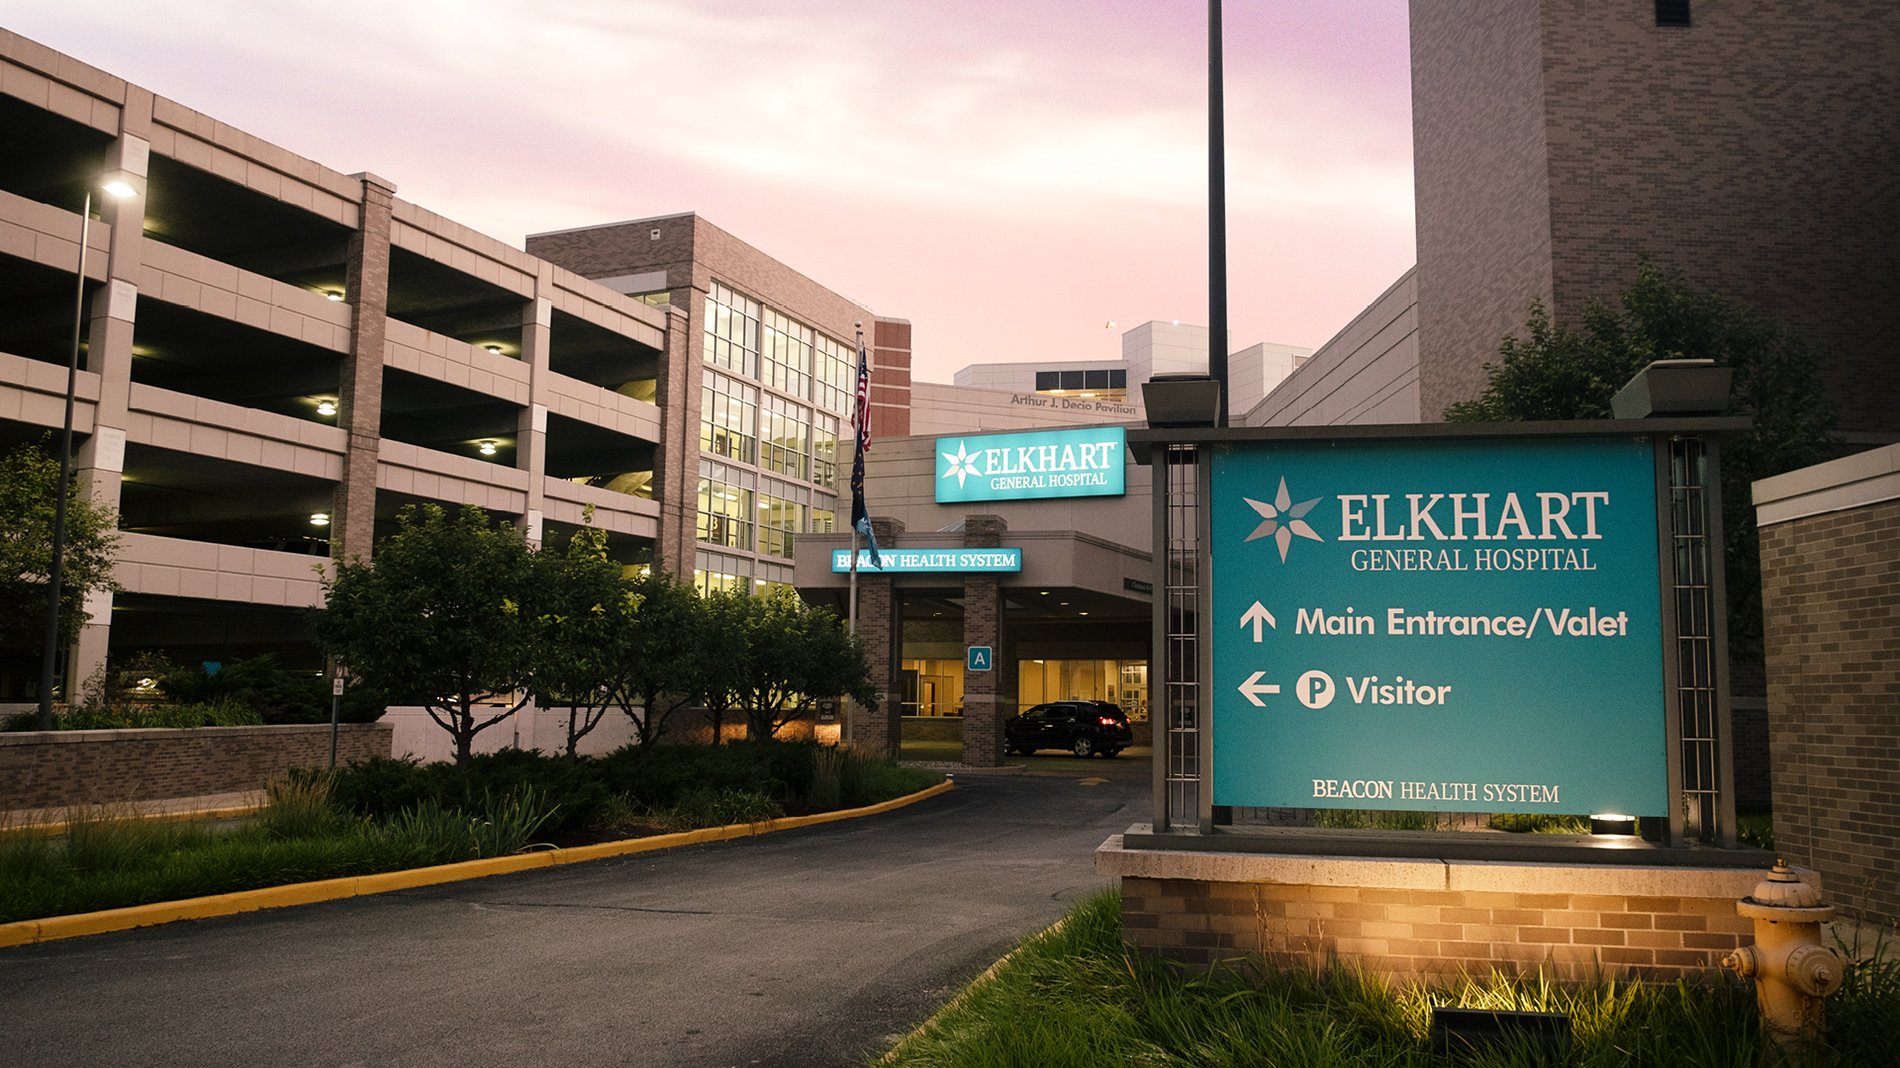 The entrance to Elkhart General Hospital has a teal sign that indicates the parking lot and entrance.